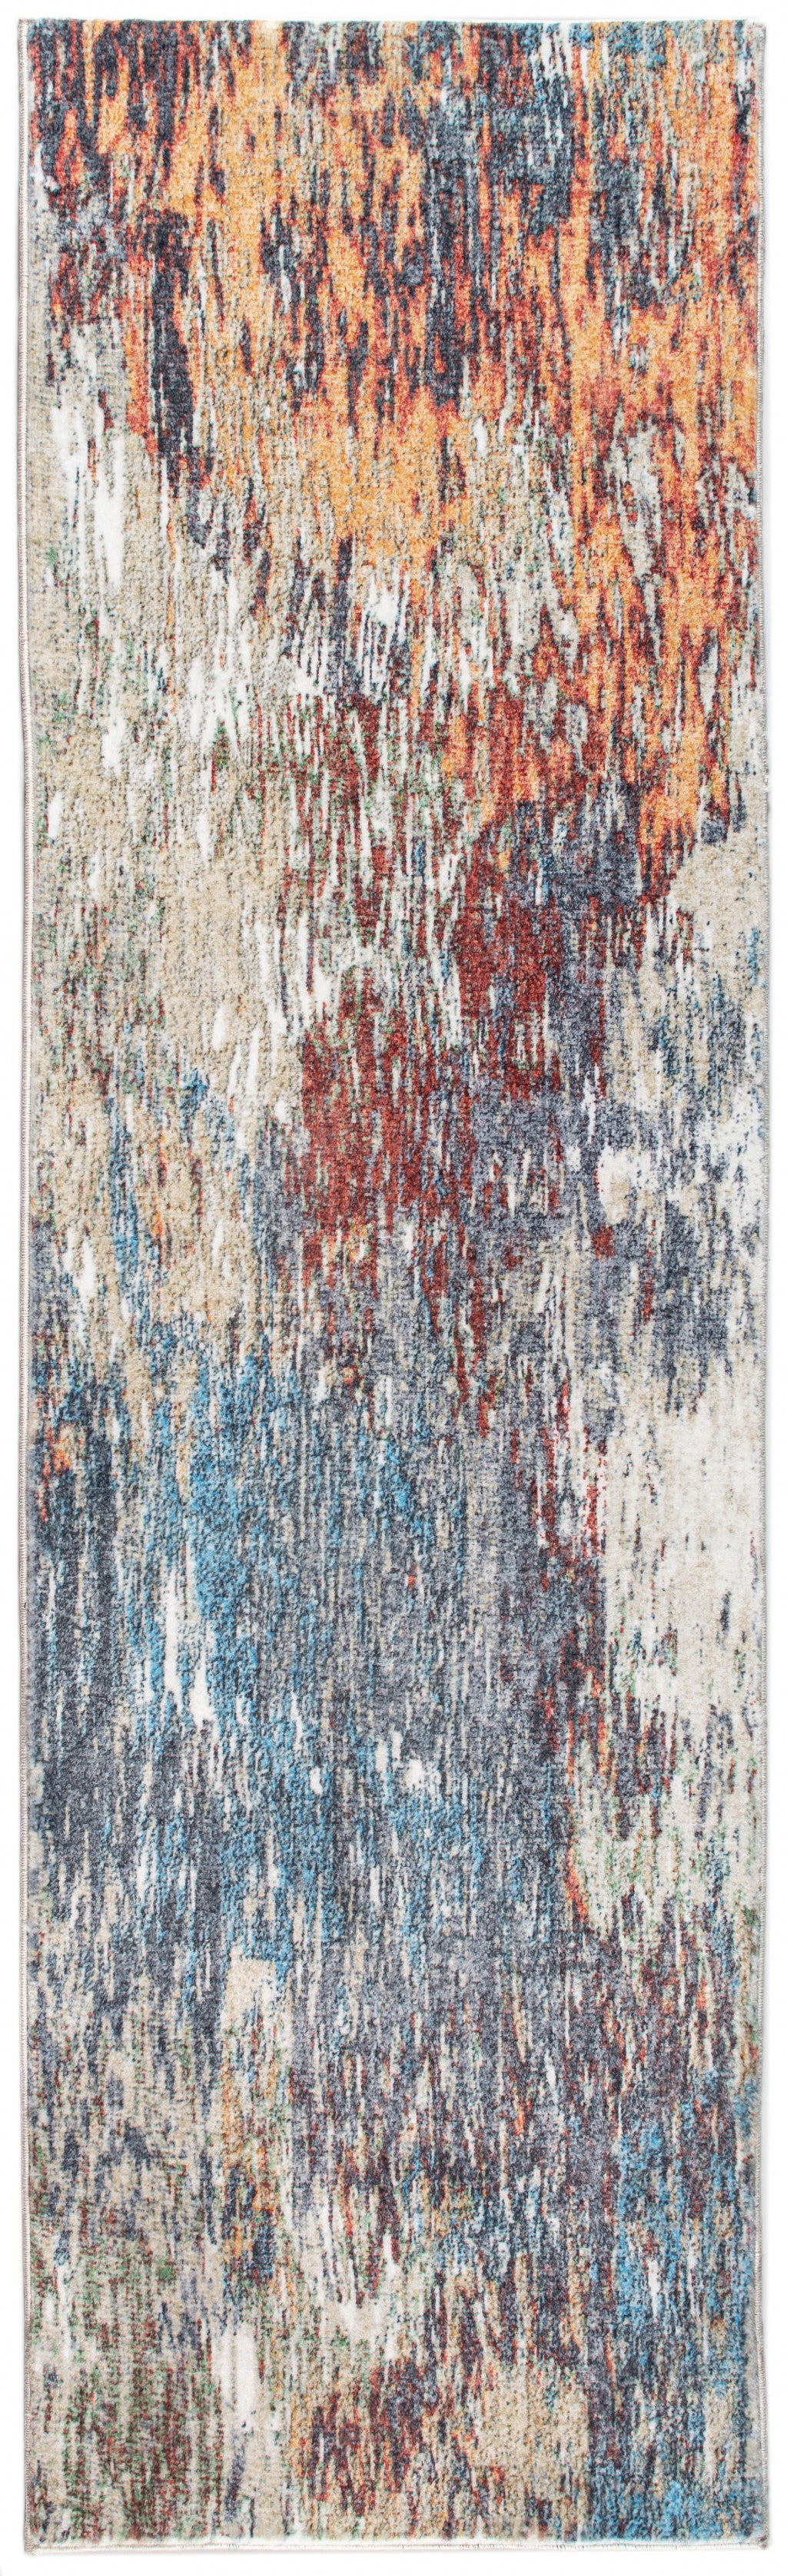 5’ x 8’ Blue Red Abstract Painting Modern Area Rug